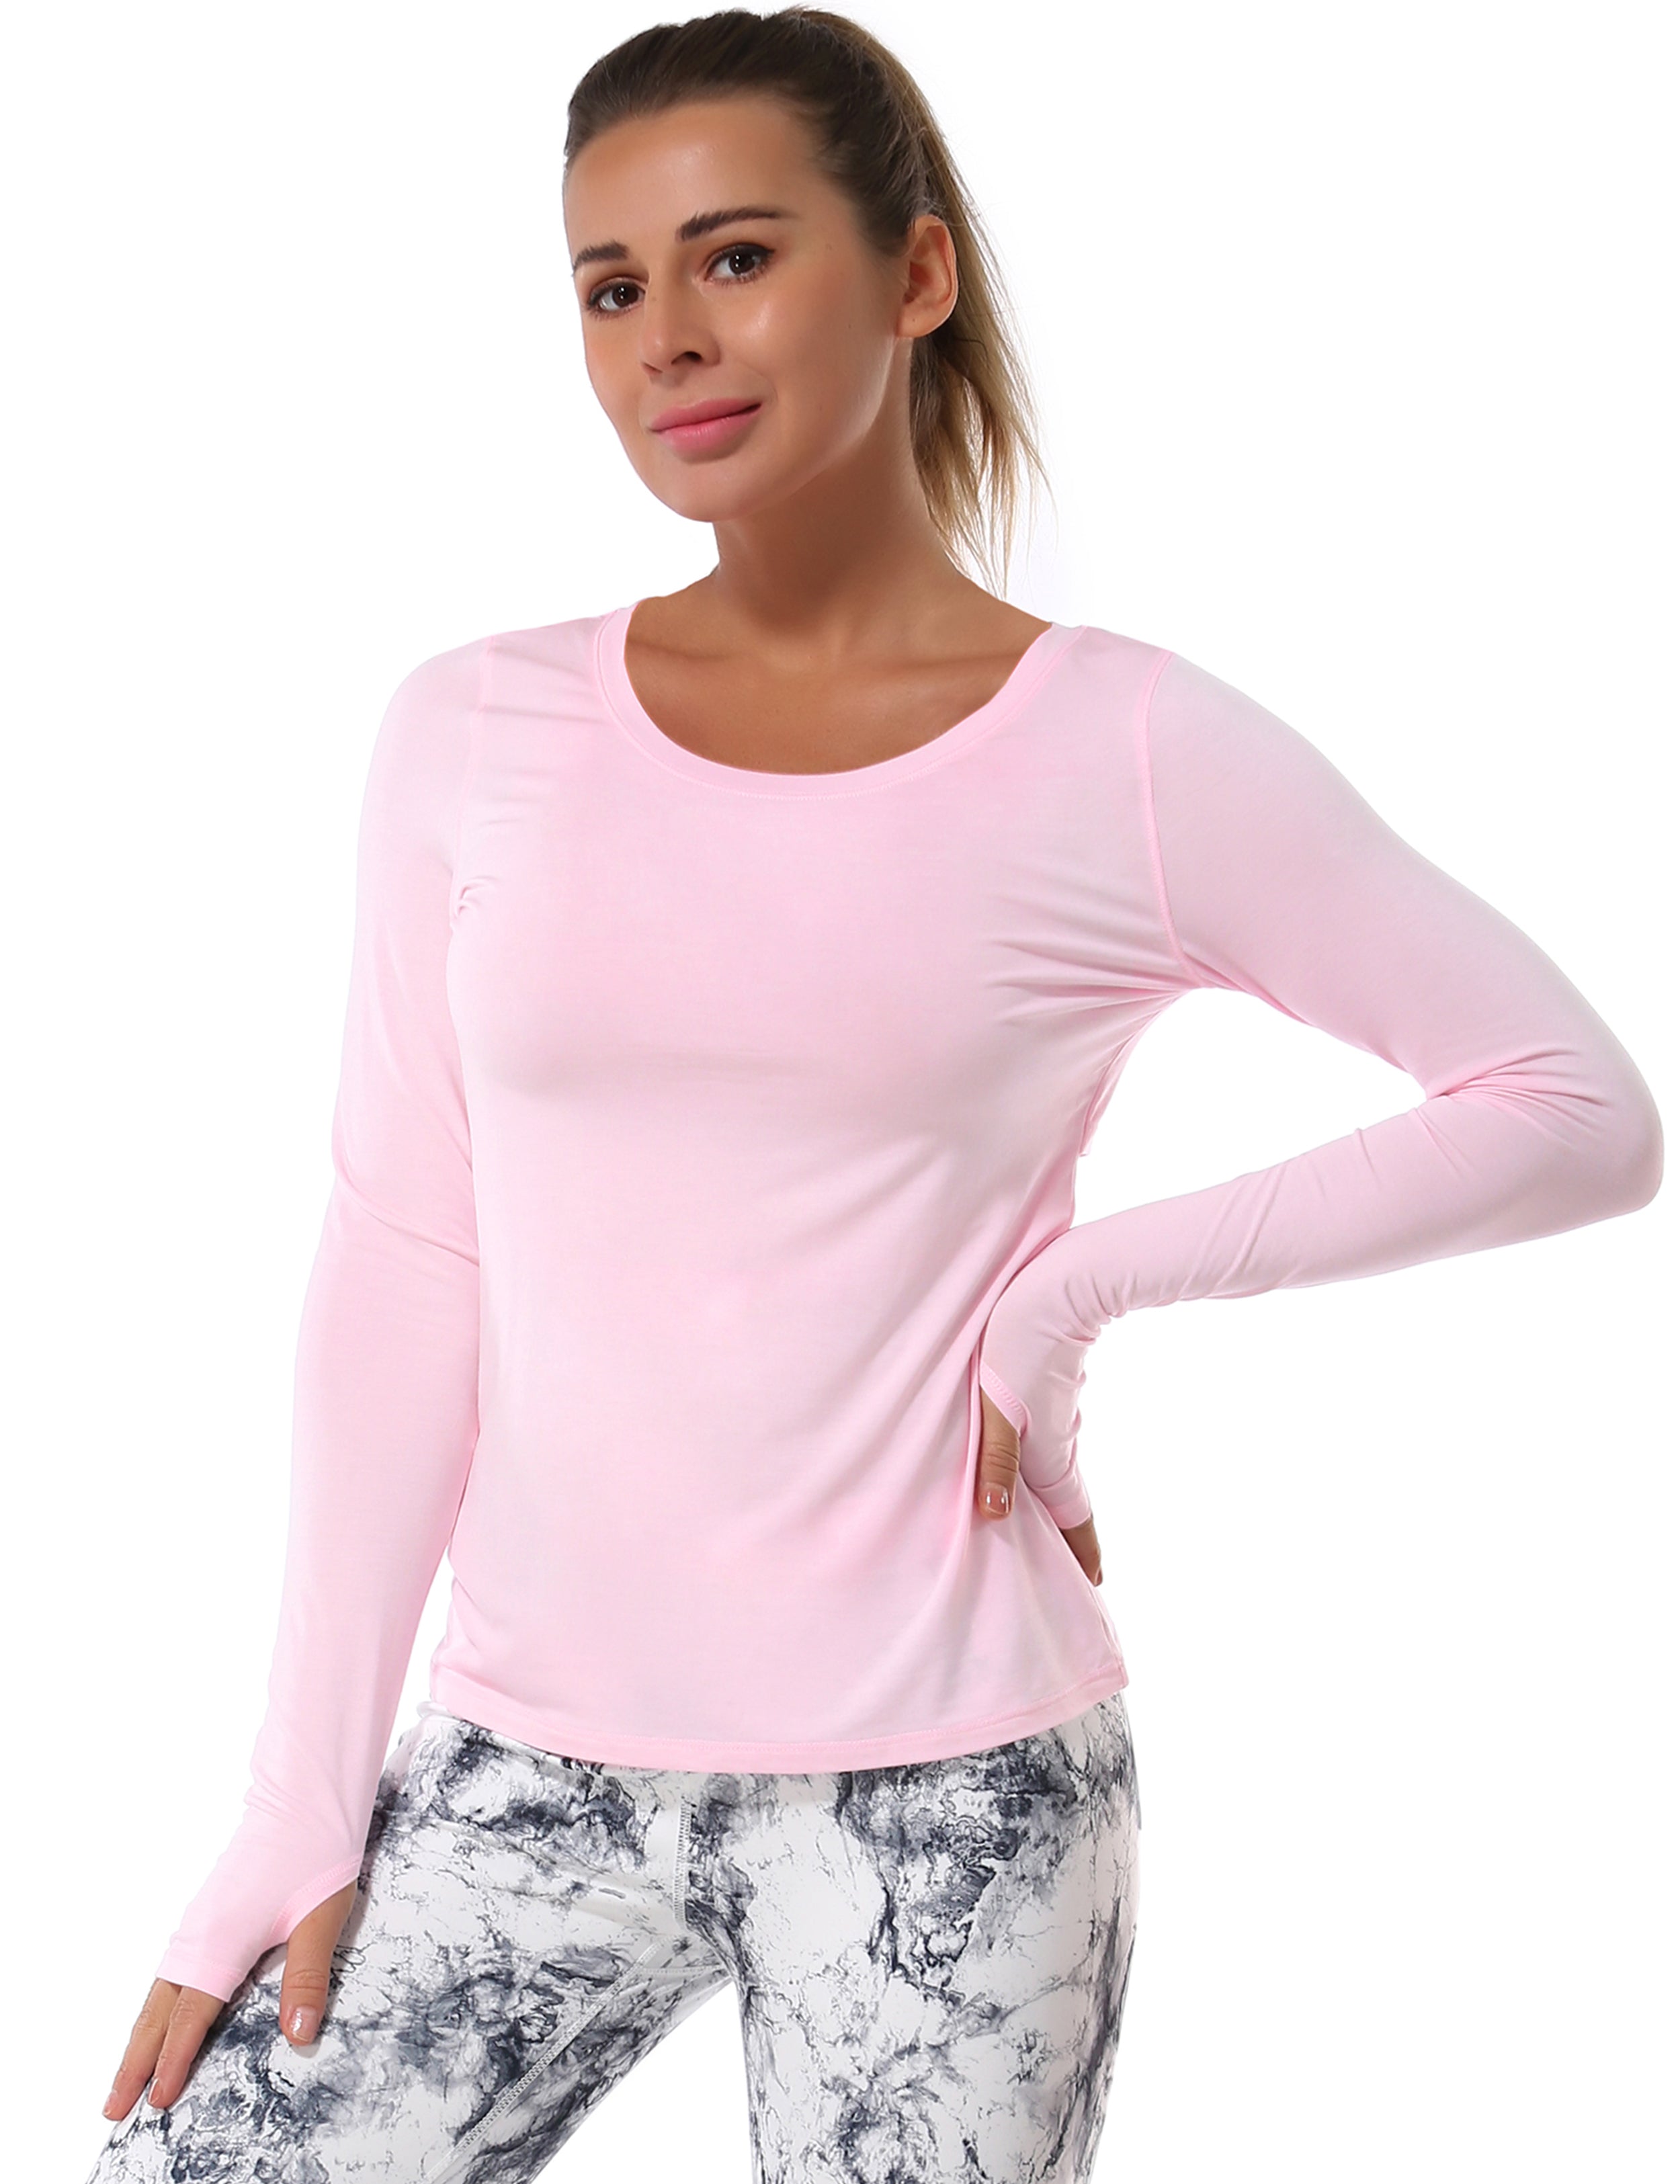 Open Back Long Sleeve Tops lightpink Designed for On the Move Slim fit 93%Modal/7%Spandex Four-way stretch Naturally breathable Super-Soft, Modal Fabric